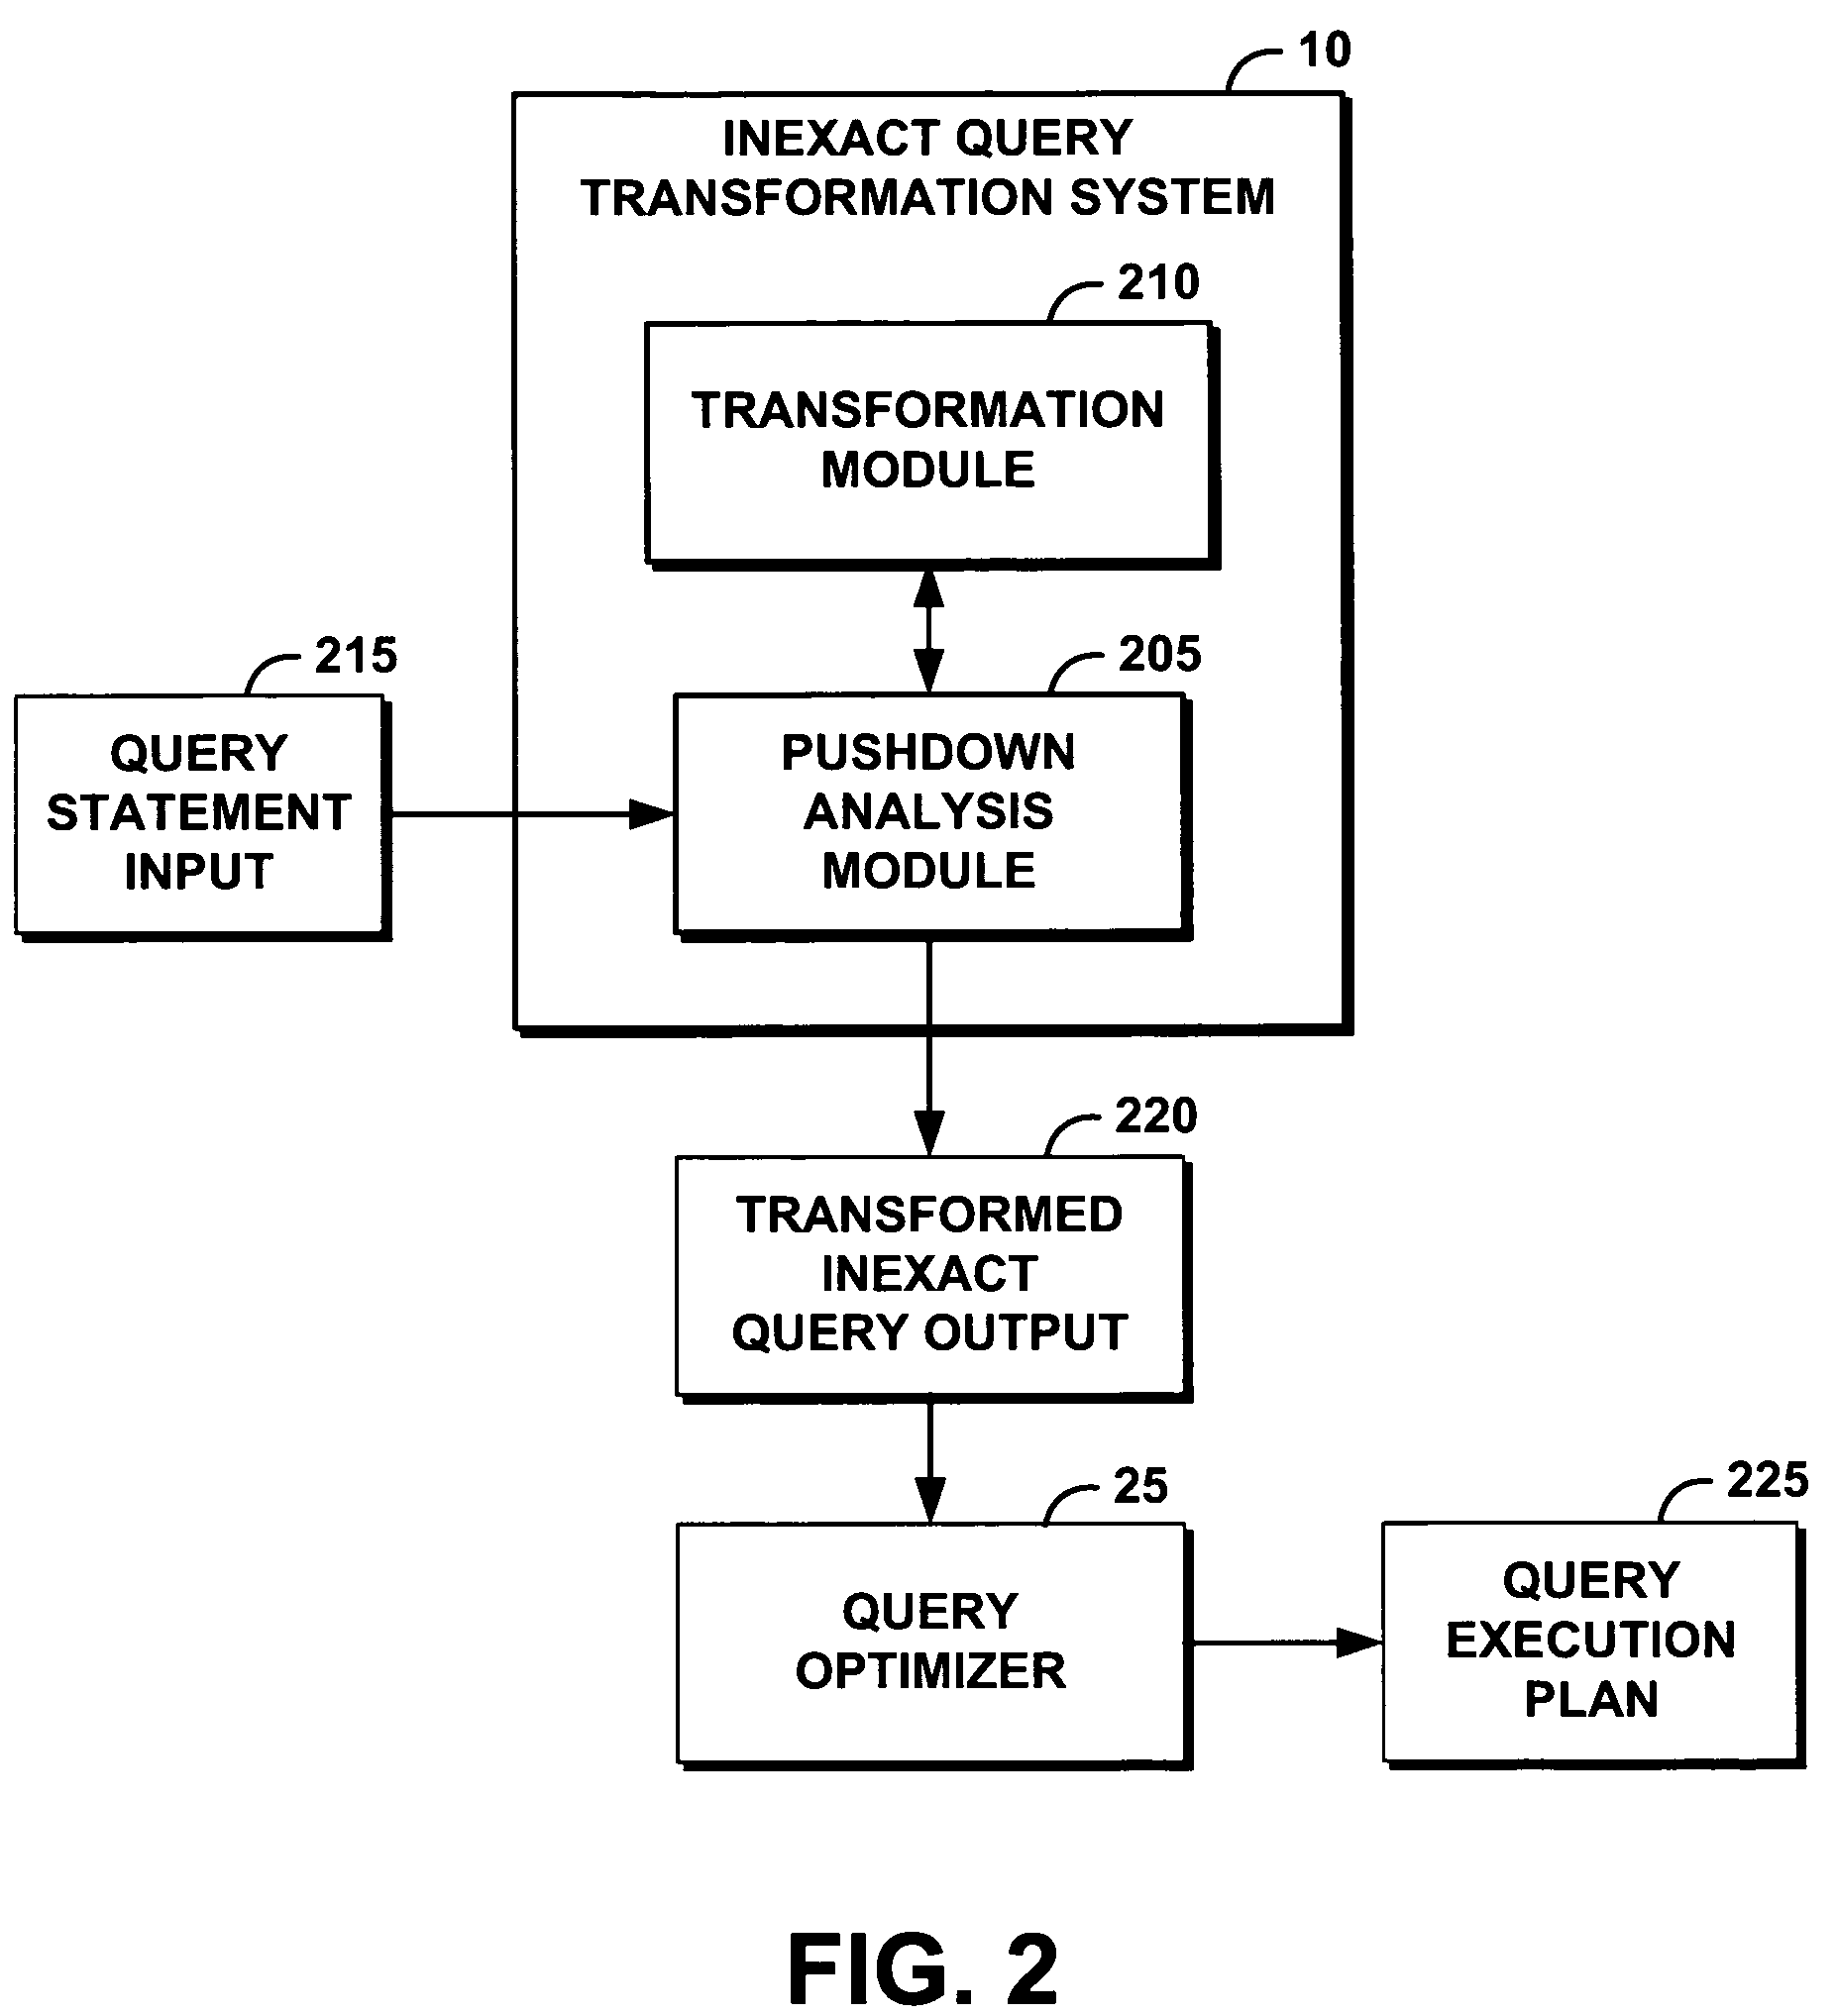 Method for performing an inexact query transformation in a heterogeneous environment